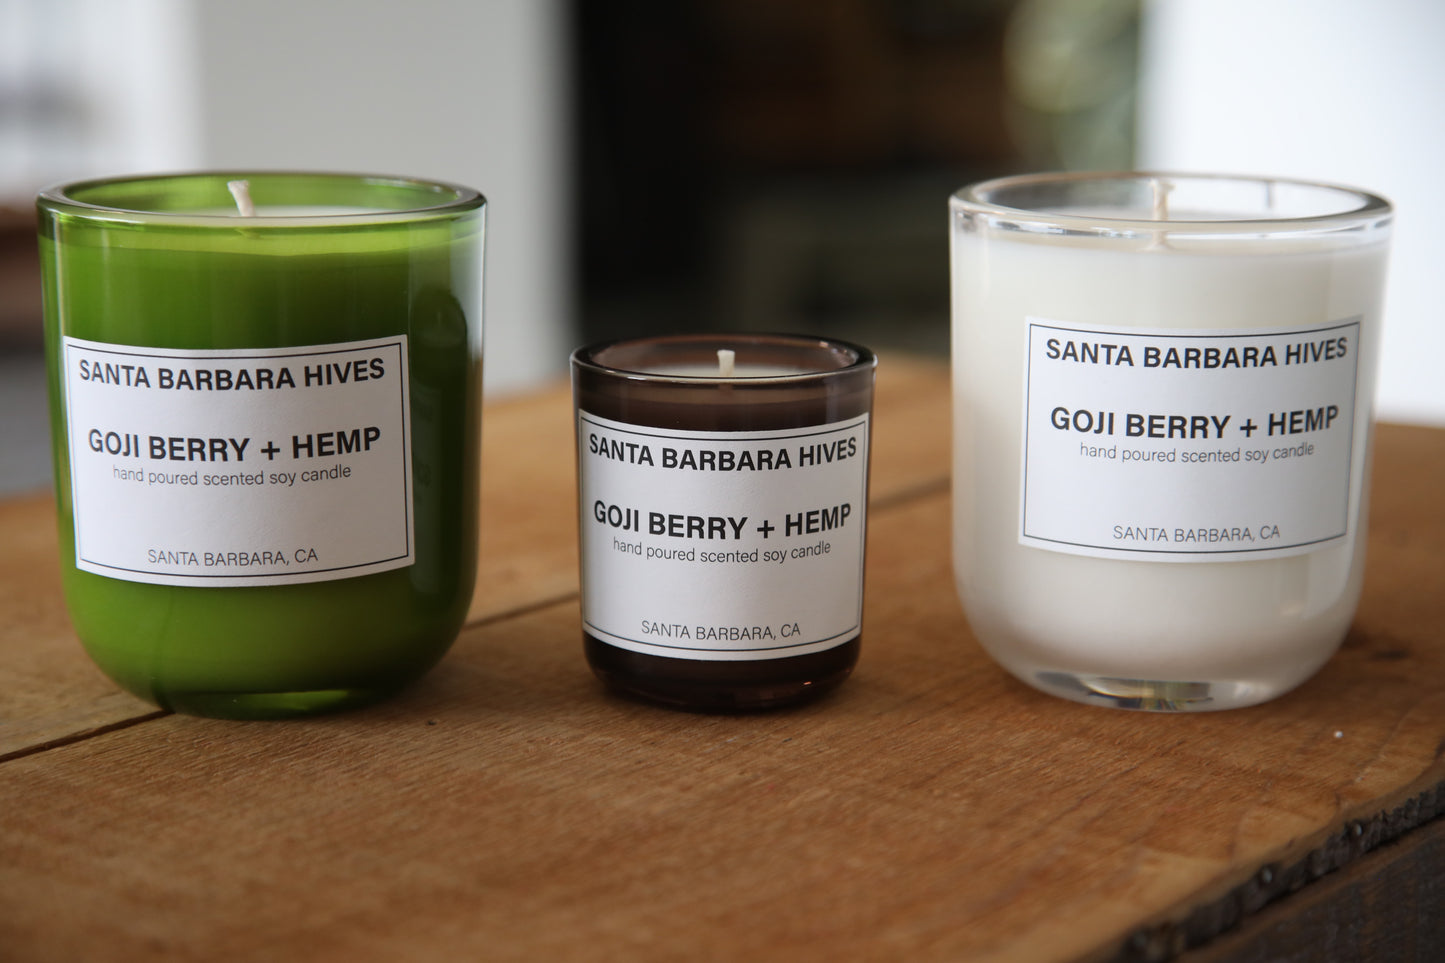 Goji Berry + Hemp Scented Soy Candle